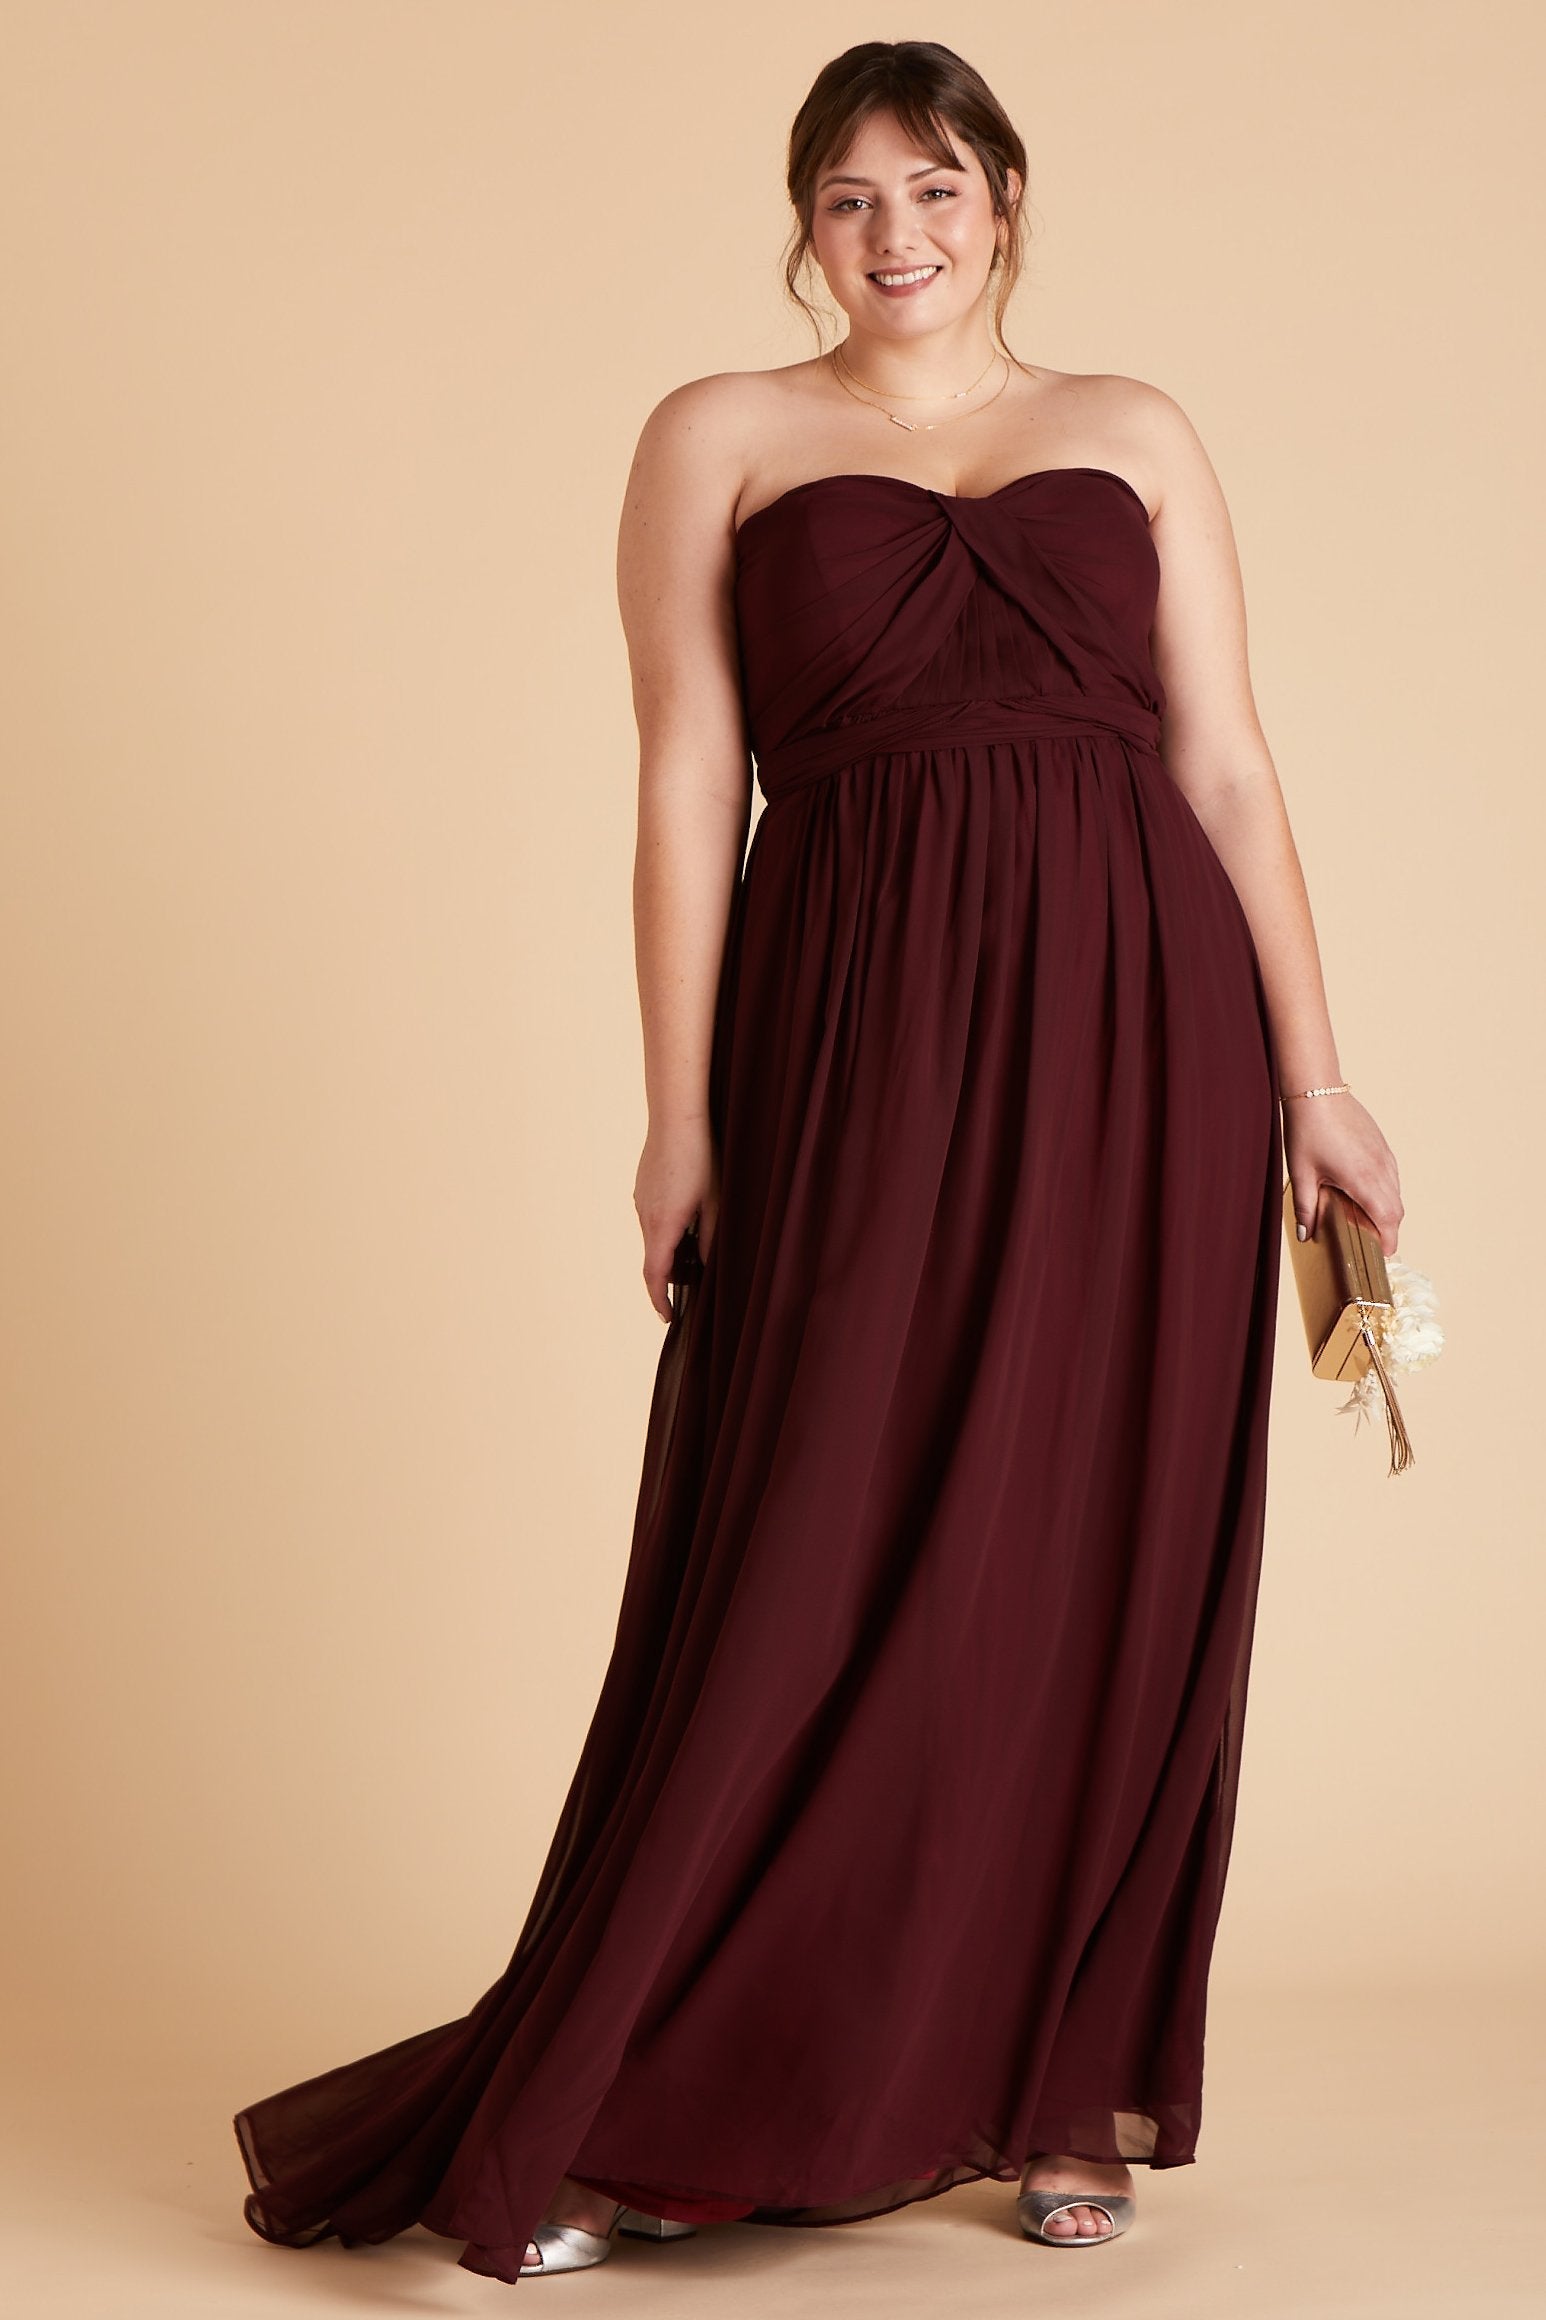 Grace convertible plus size bridesmaid dress in cabernet burgundy chiffon by Birdy Grey, front view